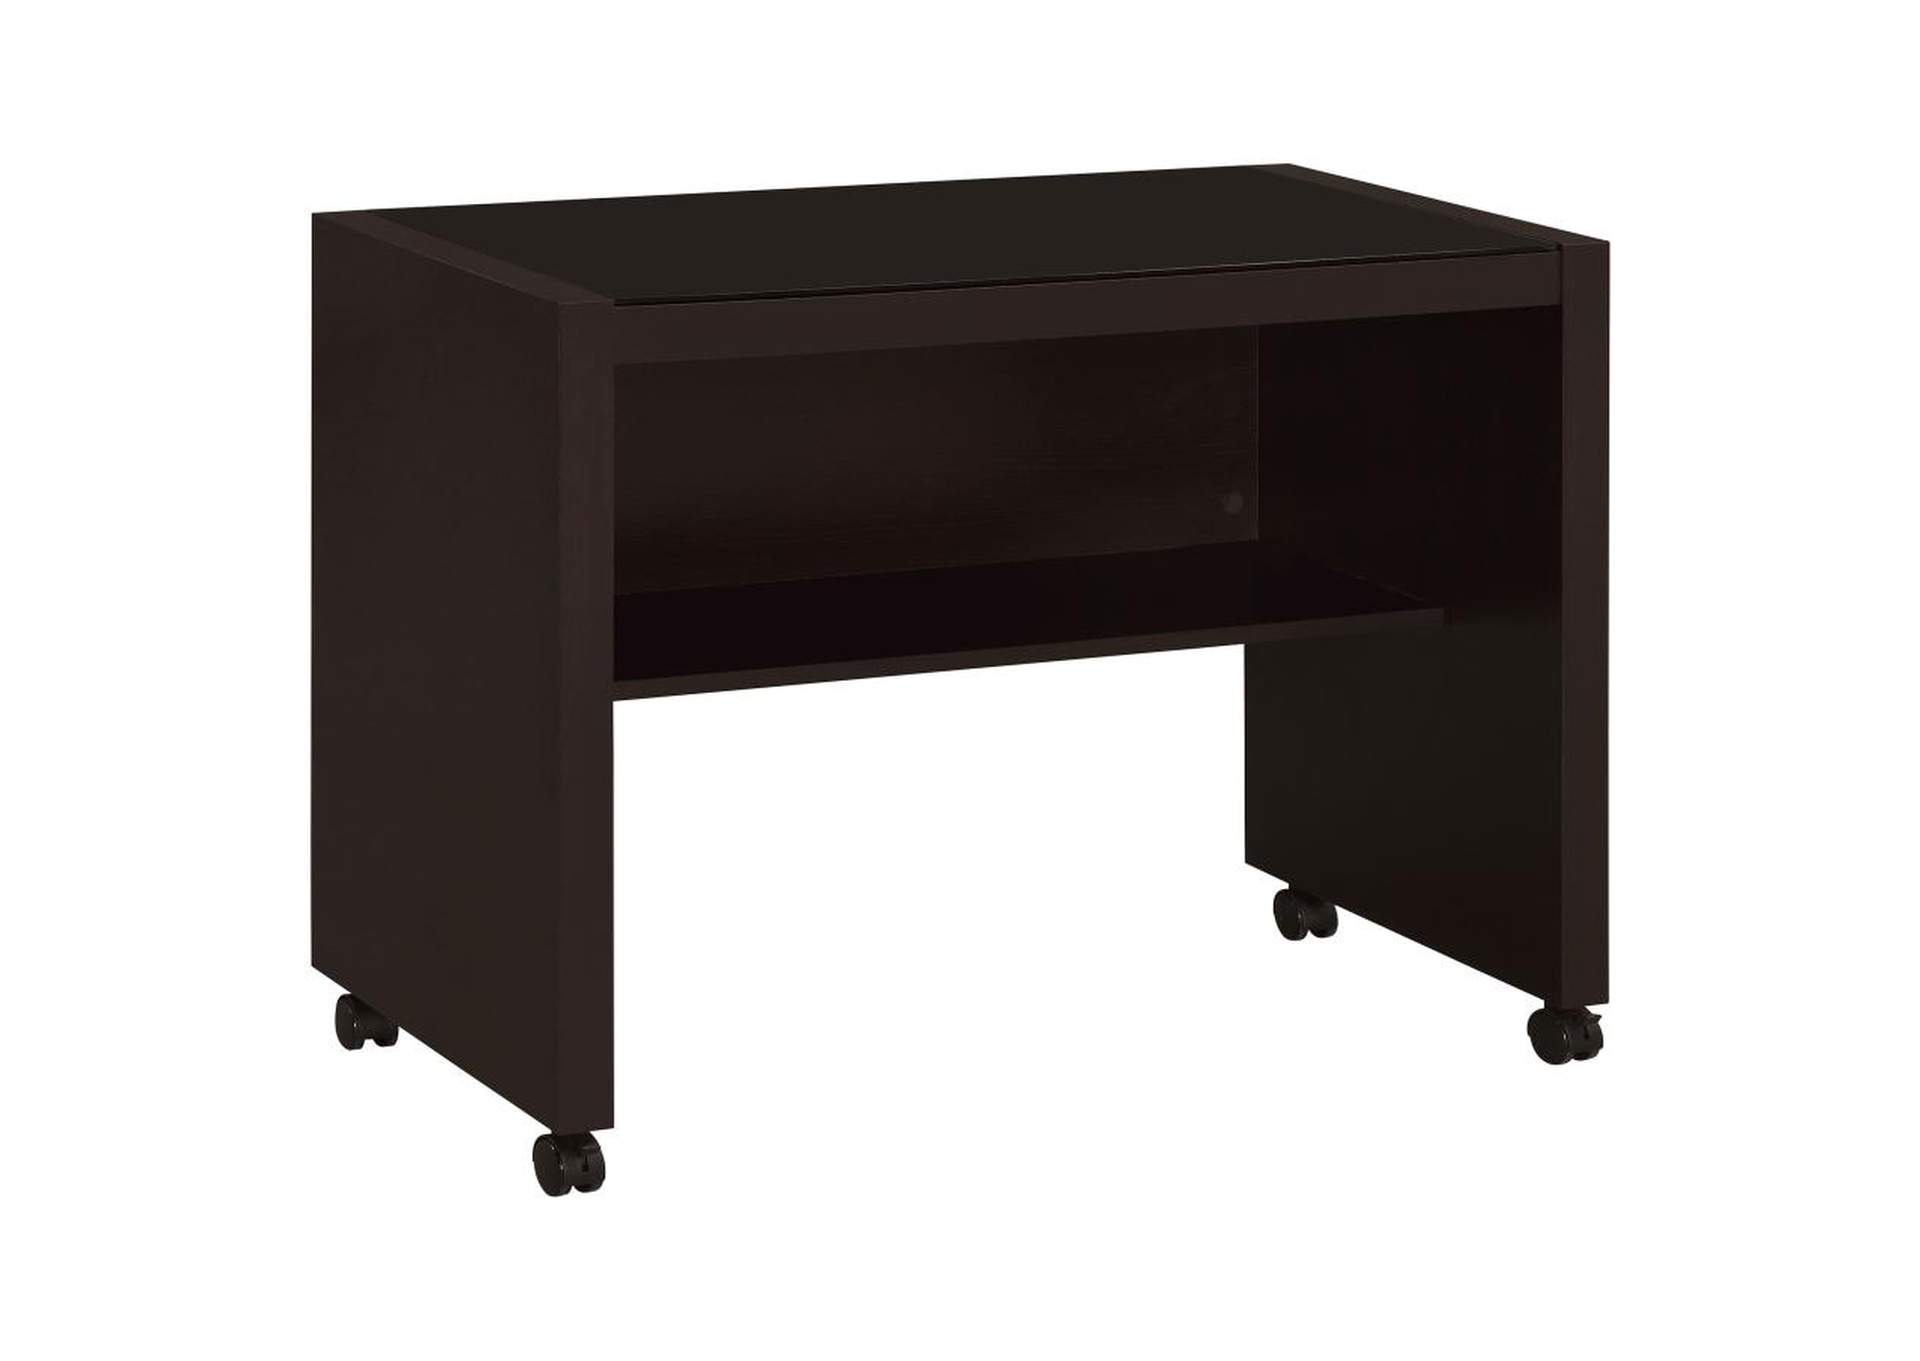 Skeena Mobile Return with Casters Cappuccino,Coaster Furniture